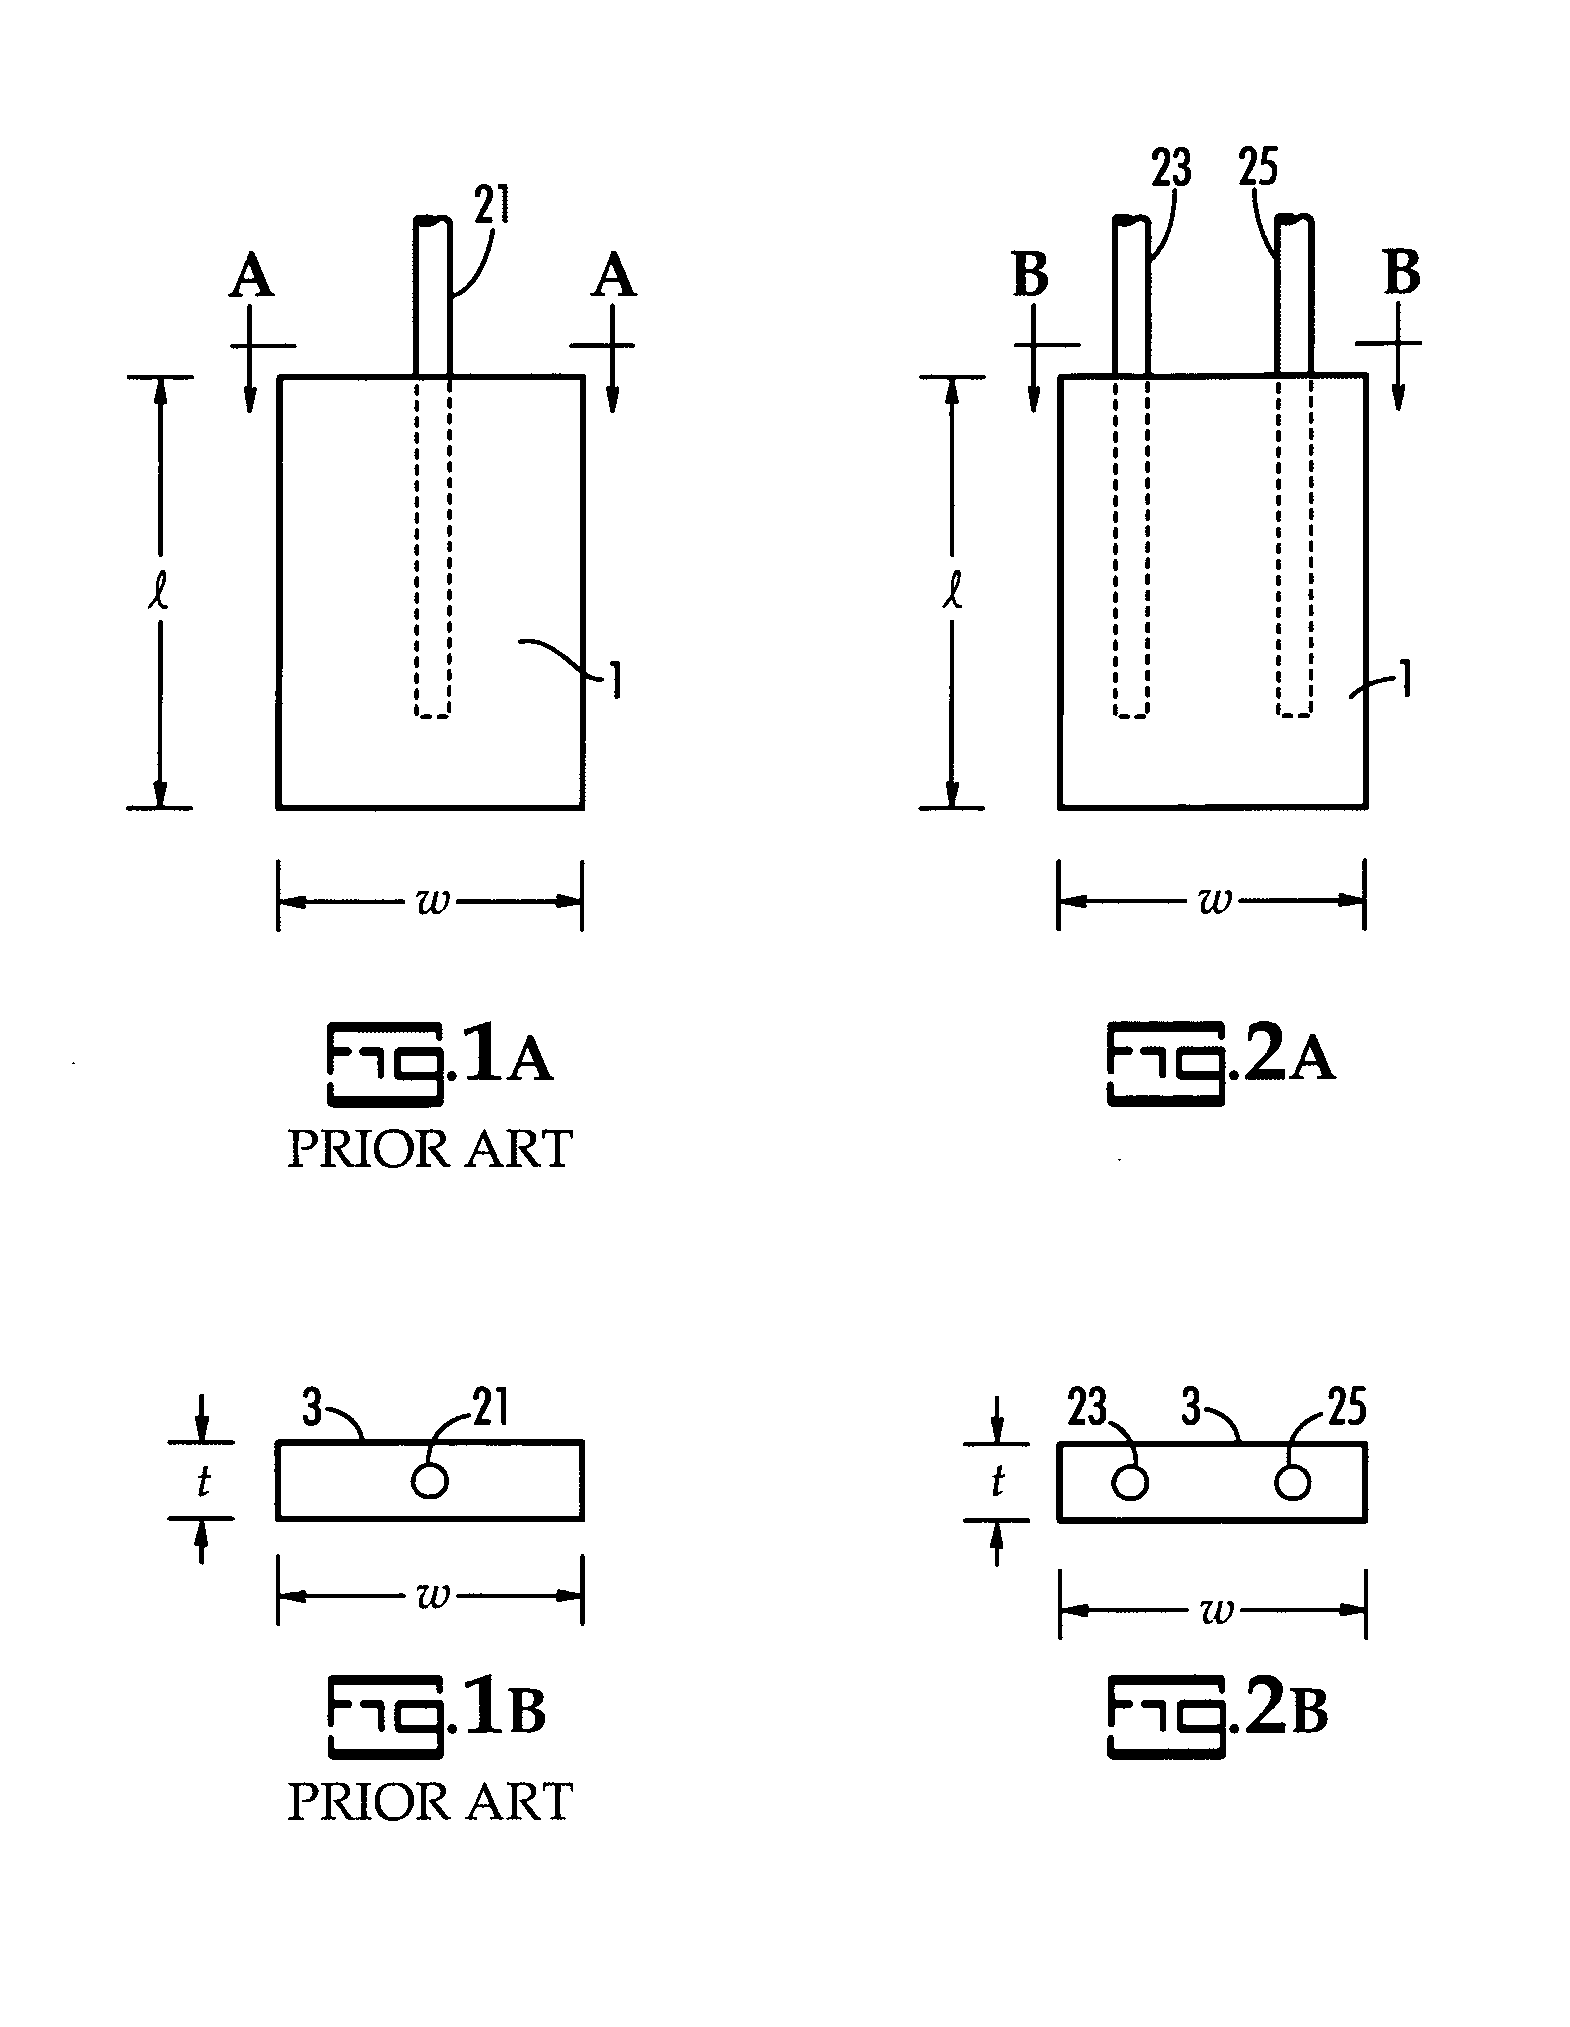 Reduced ESR through use of multiple wire anode